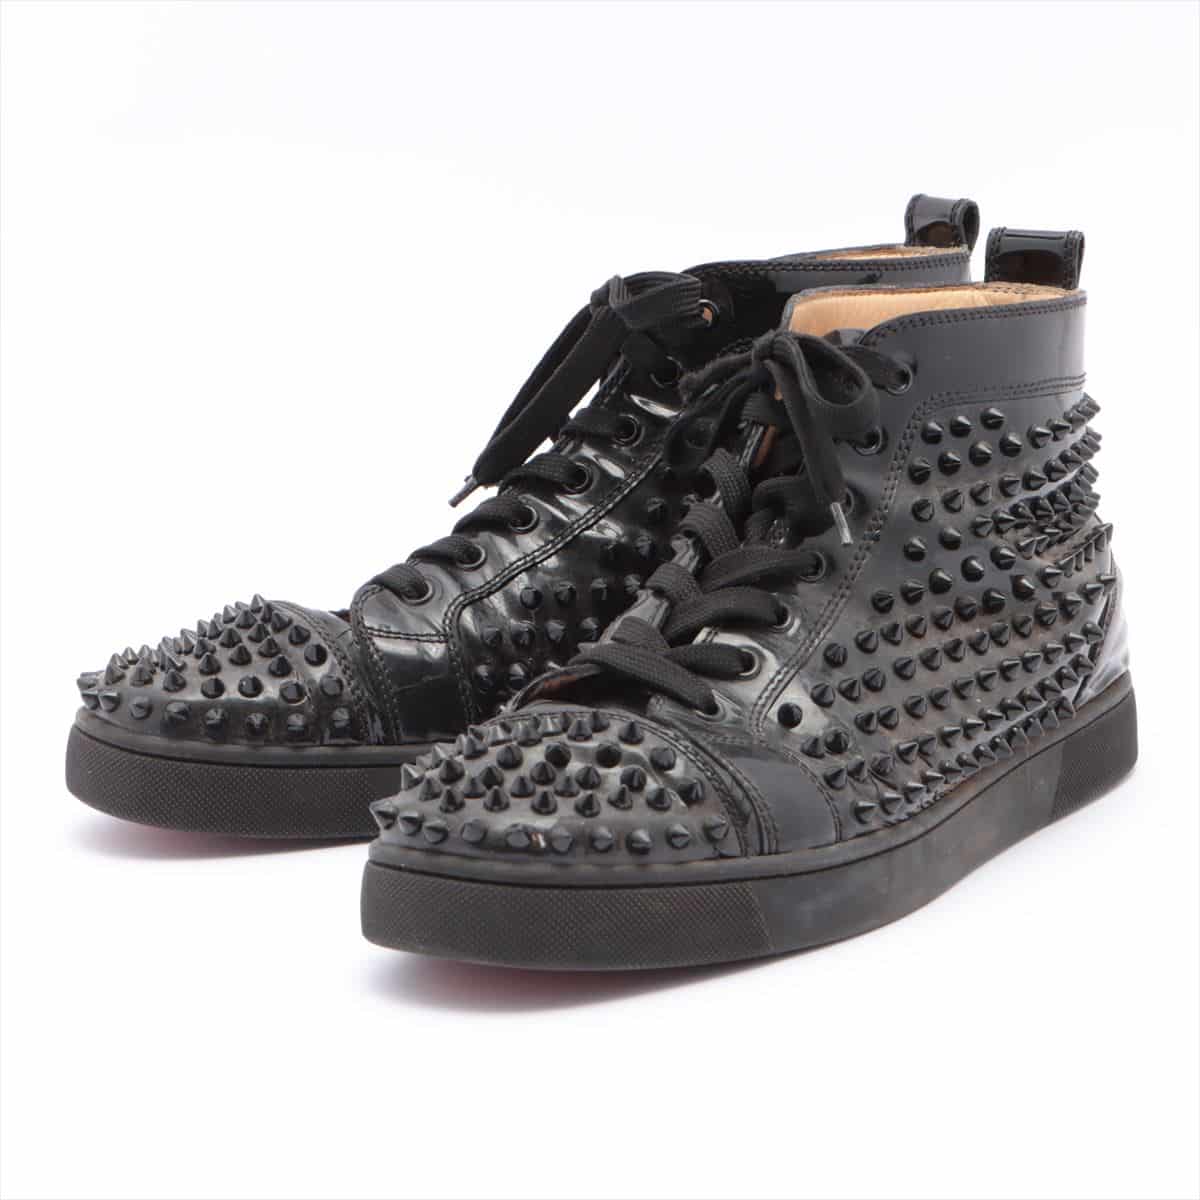 Christian Louboutin Louis Flat Patent leather High-top Sneakers 44 Men's Black Studs